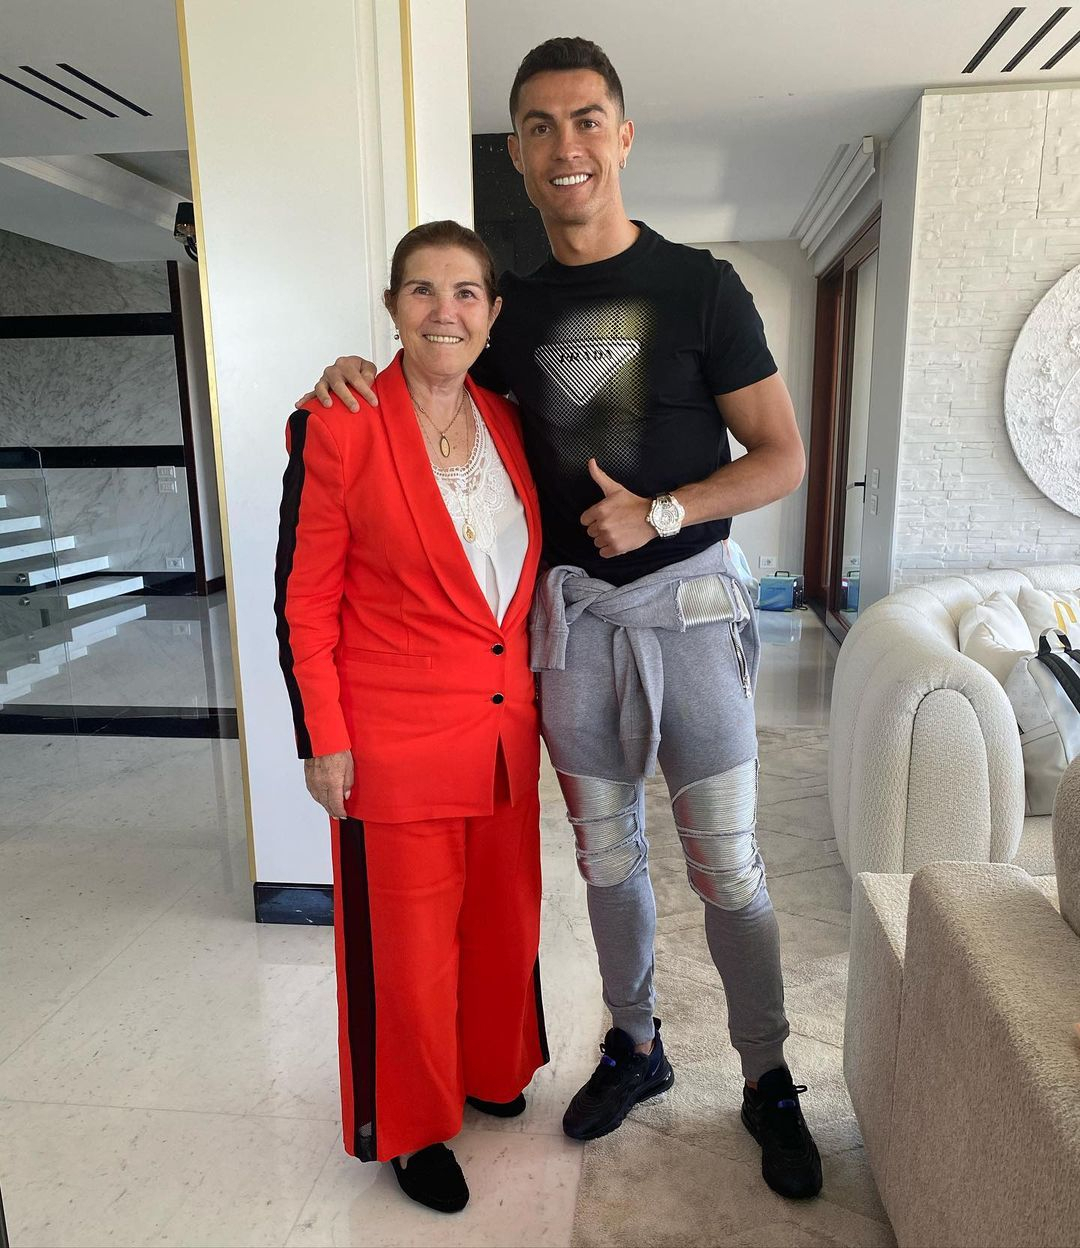 Cristiano Ronaldo has declared his mum is banned from watching him play in big games due to her nerves